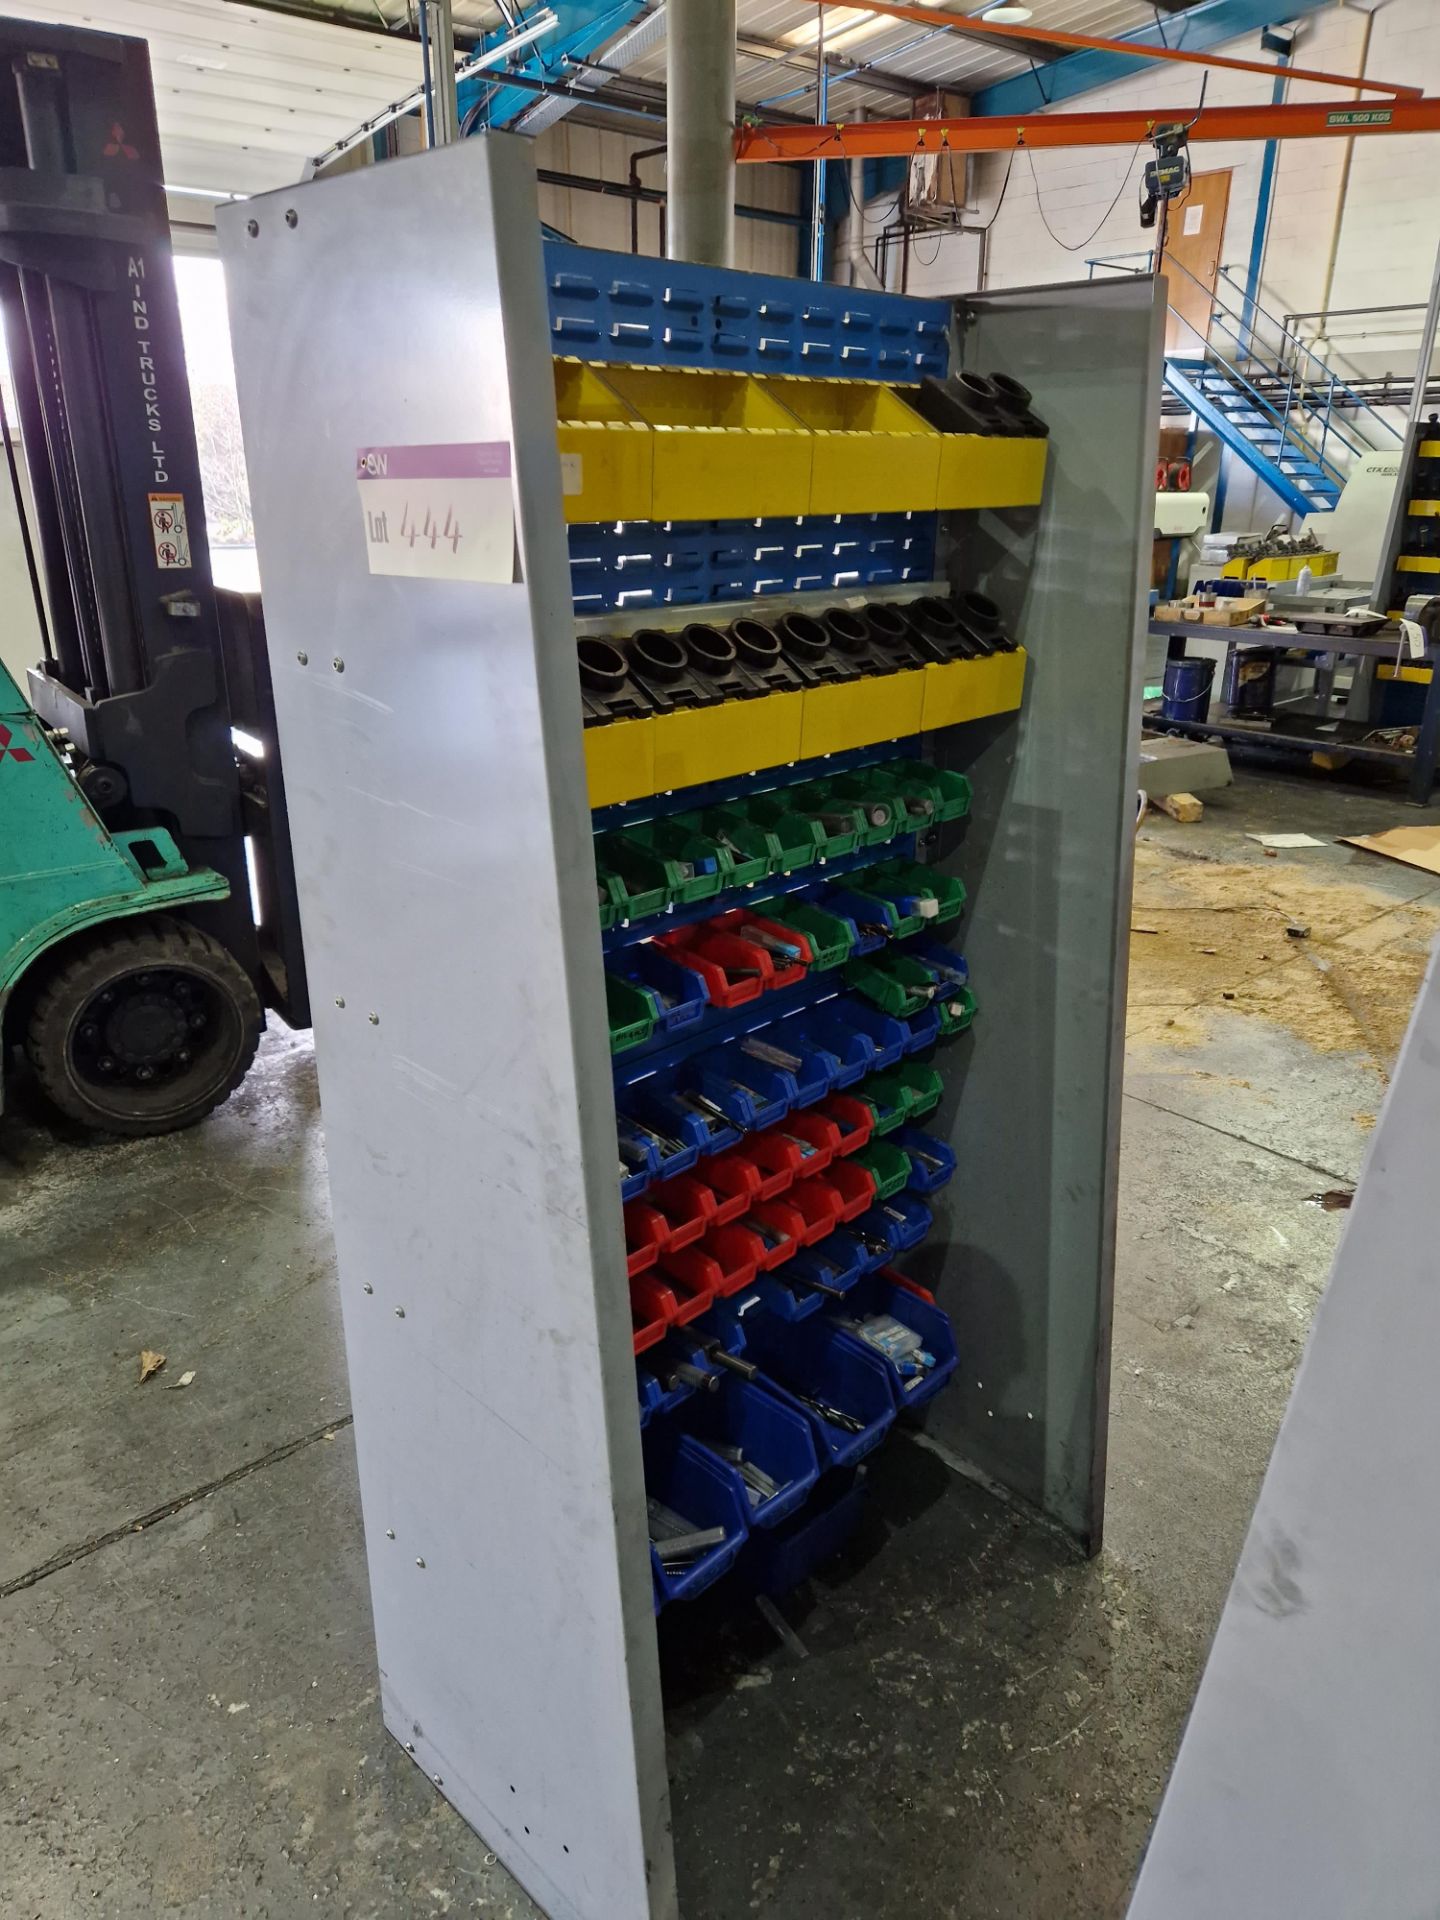 Lin Bin Rack & Contents, including Drill Bits, BT40 Tool Holders, Reamers, etcPlease read the